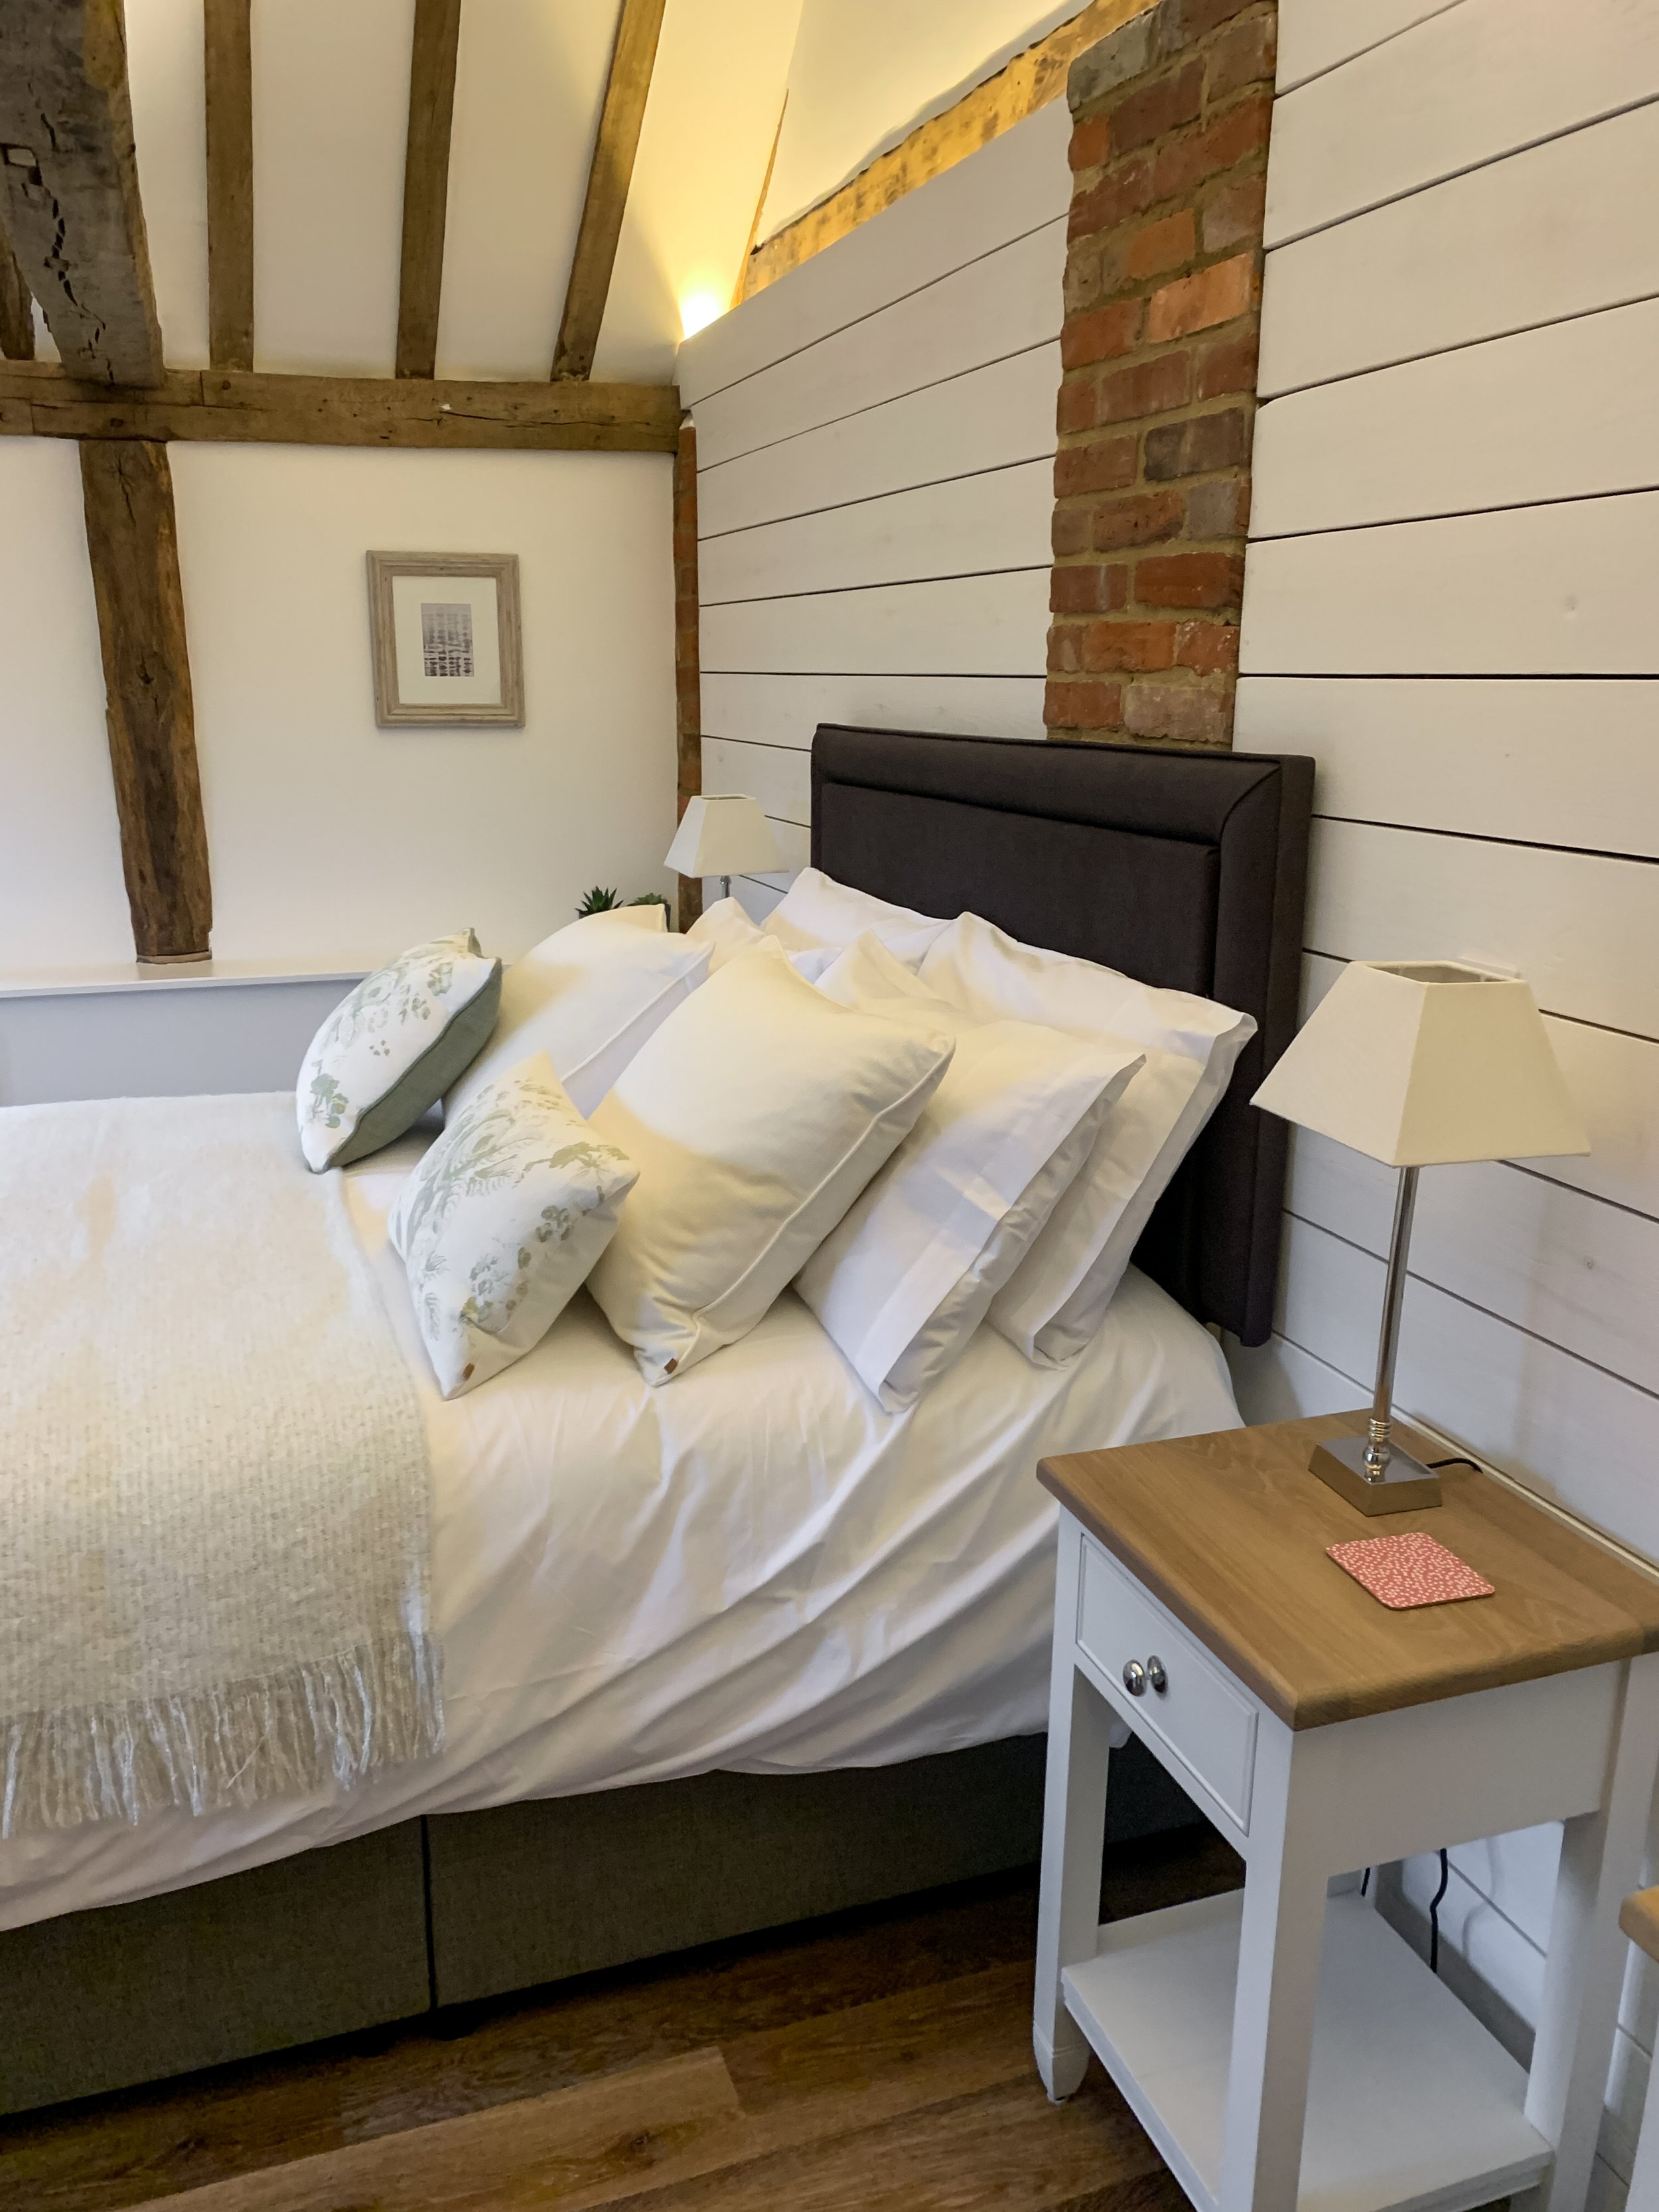 King Sized beds for a comfortable stay on your holiday in Kent